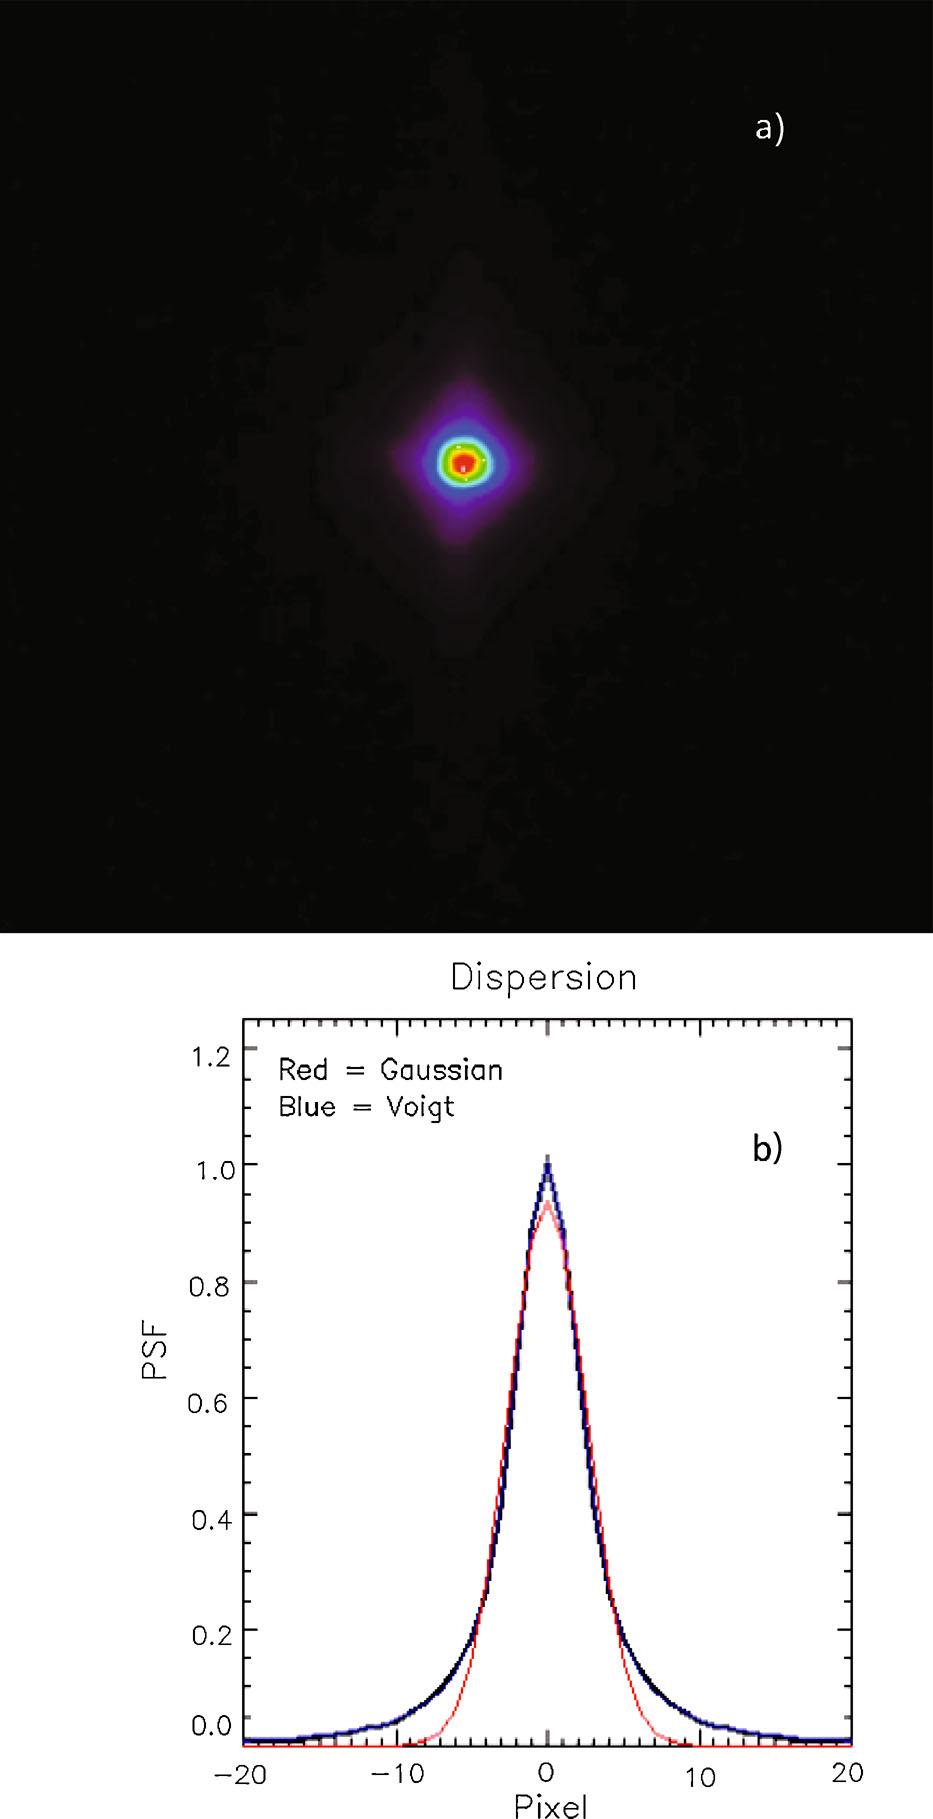 W.E. McClintock et al. Fig. 26 The top panel is a 41-pixel square image of the imaging point spread function (PSF).